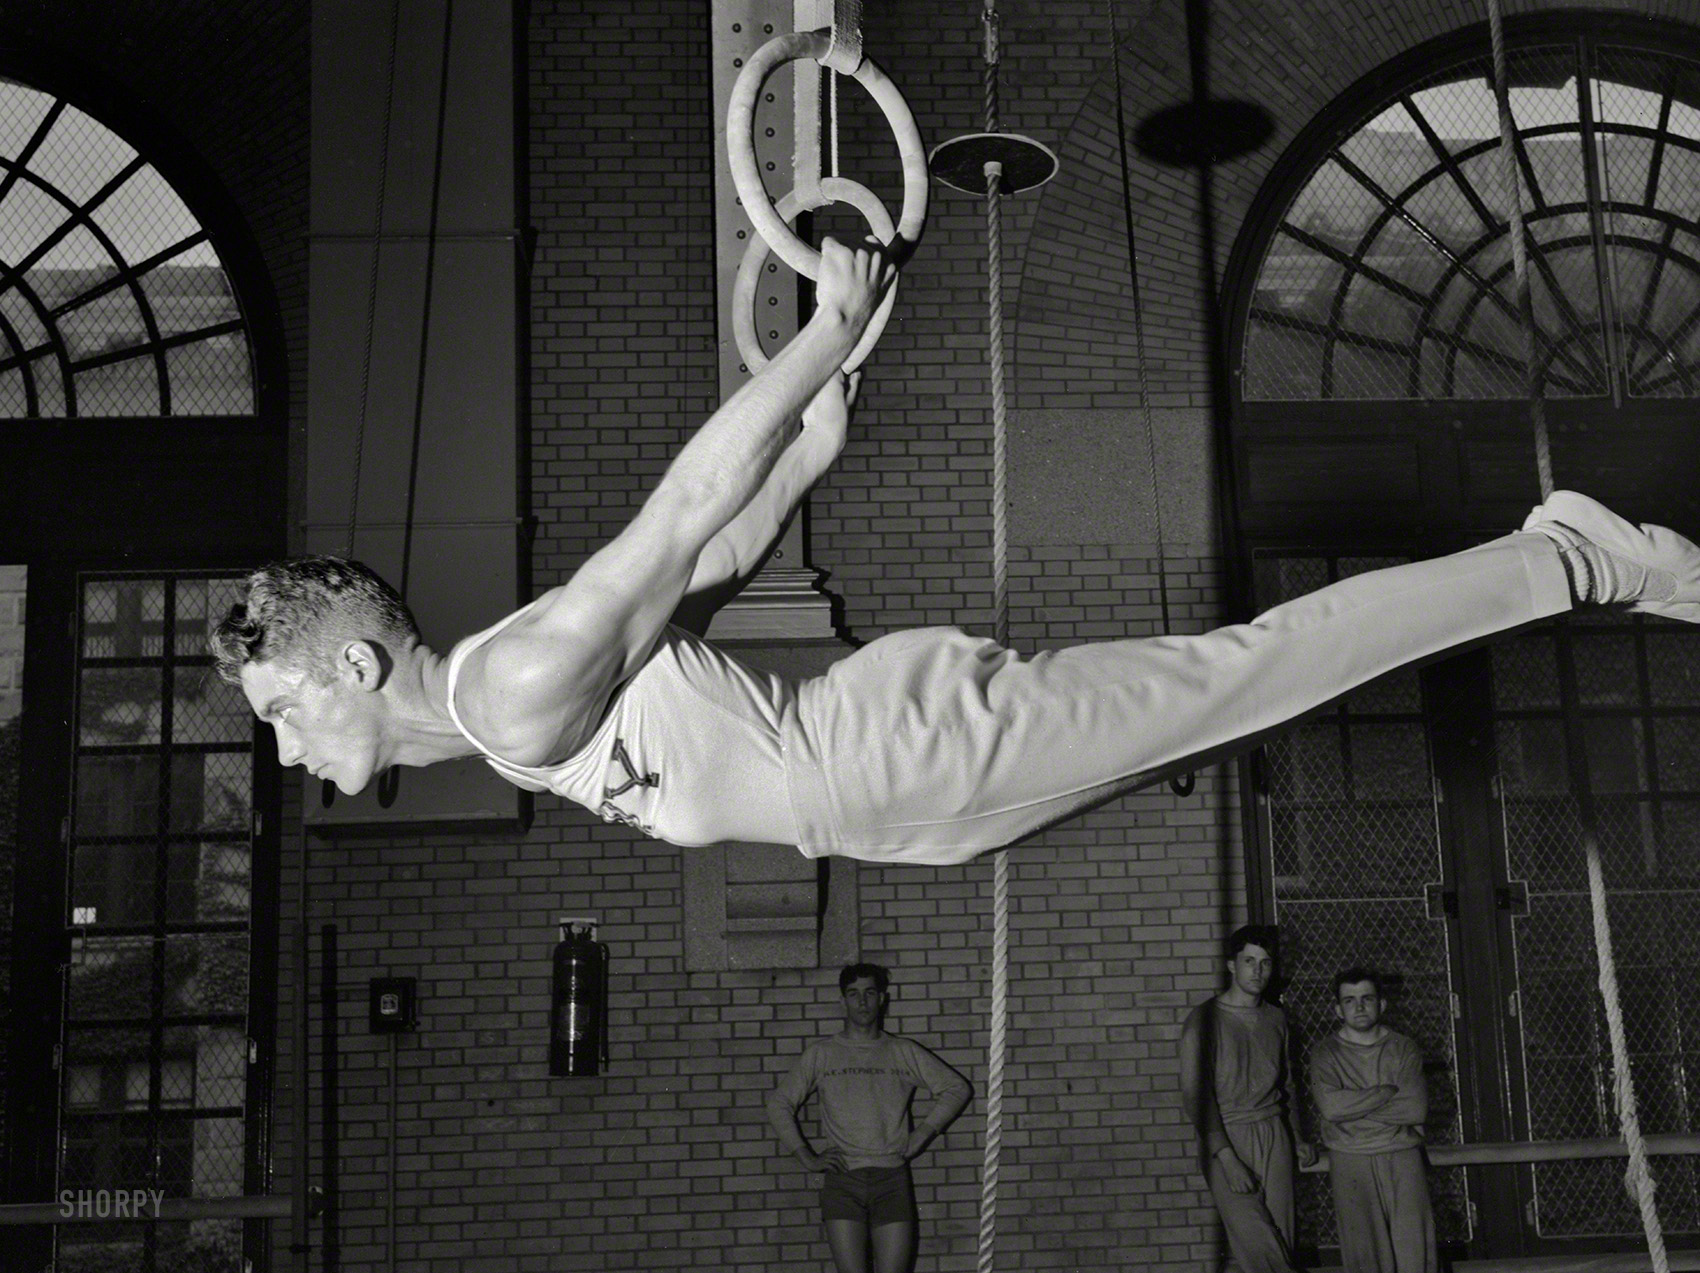 July 1942. "U.S. Naval Academy, Annapolis, Md. Gymnast on the flying rings." Our third look at Navy athletes captured on film by Lt. Whitman. View full size.